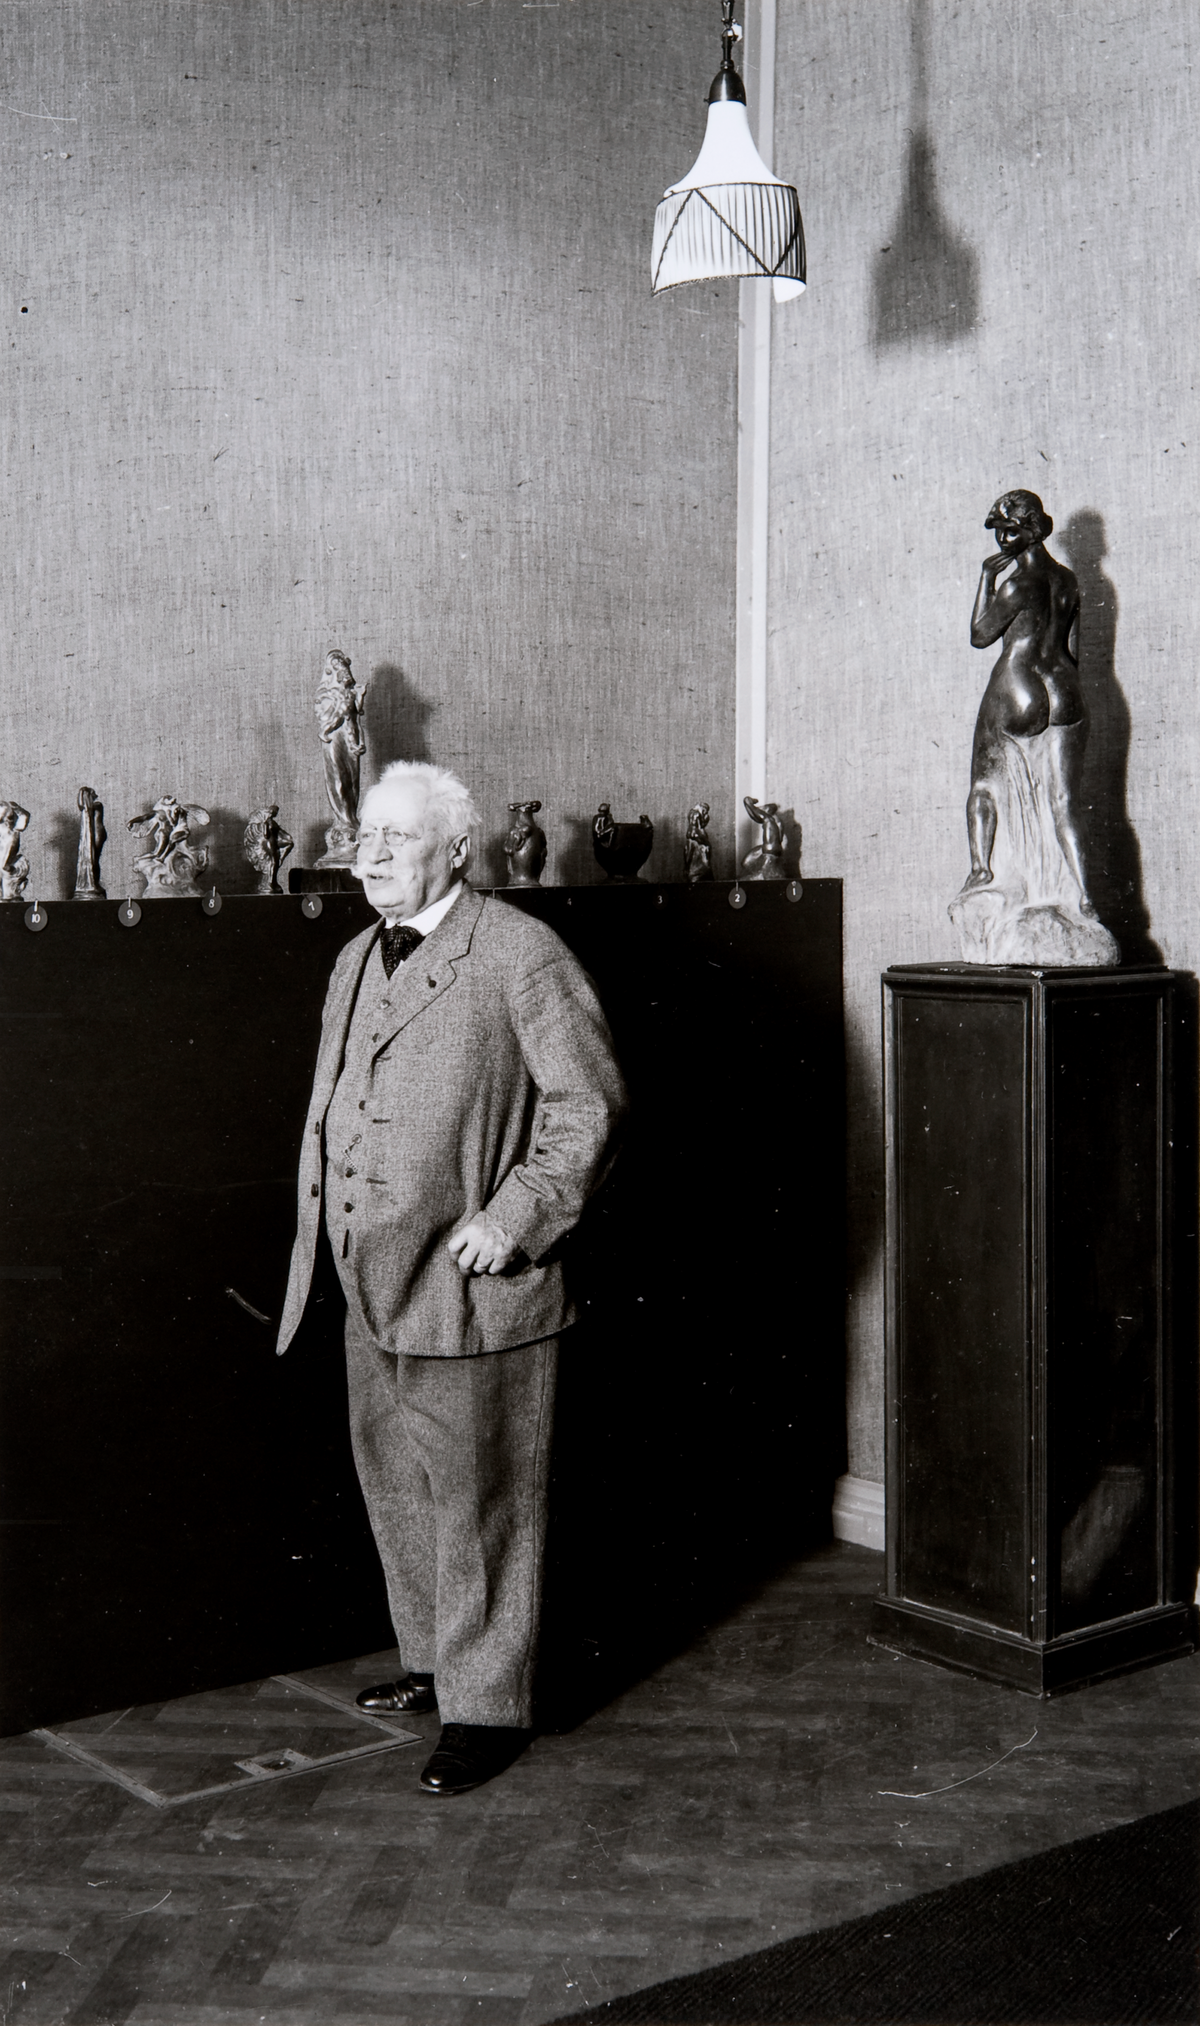 A black-and-white photo with a grey-haired gentleman with a gorgeous moustache standing in the middle. Small sculptures can be seen behind him, and a miniature version of Havis Amanda (a sculpture of a naked young woman) stands separate from the other sculptures.